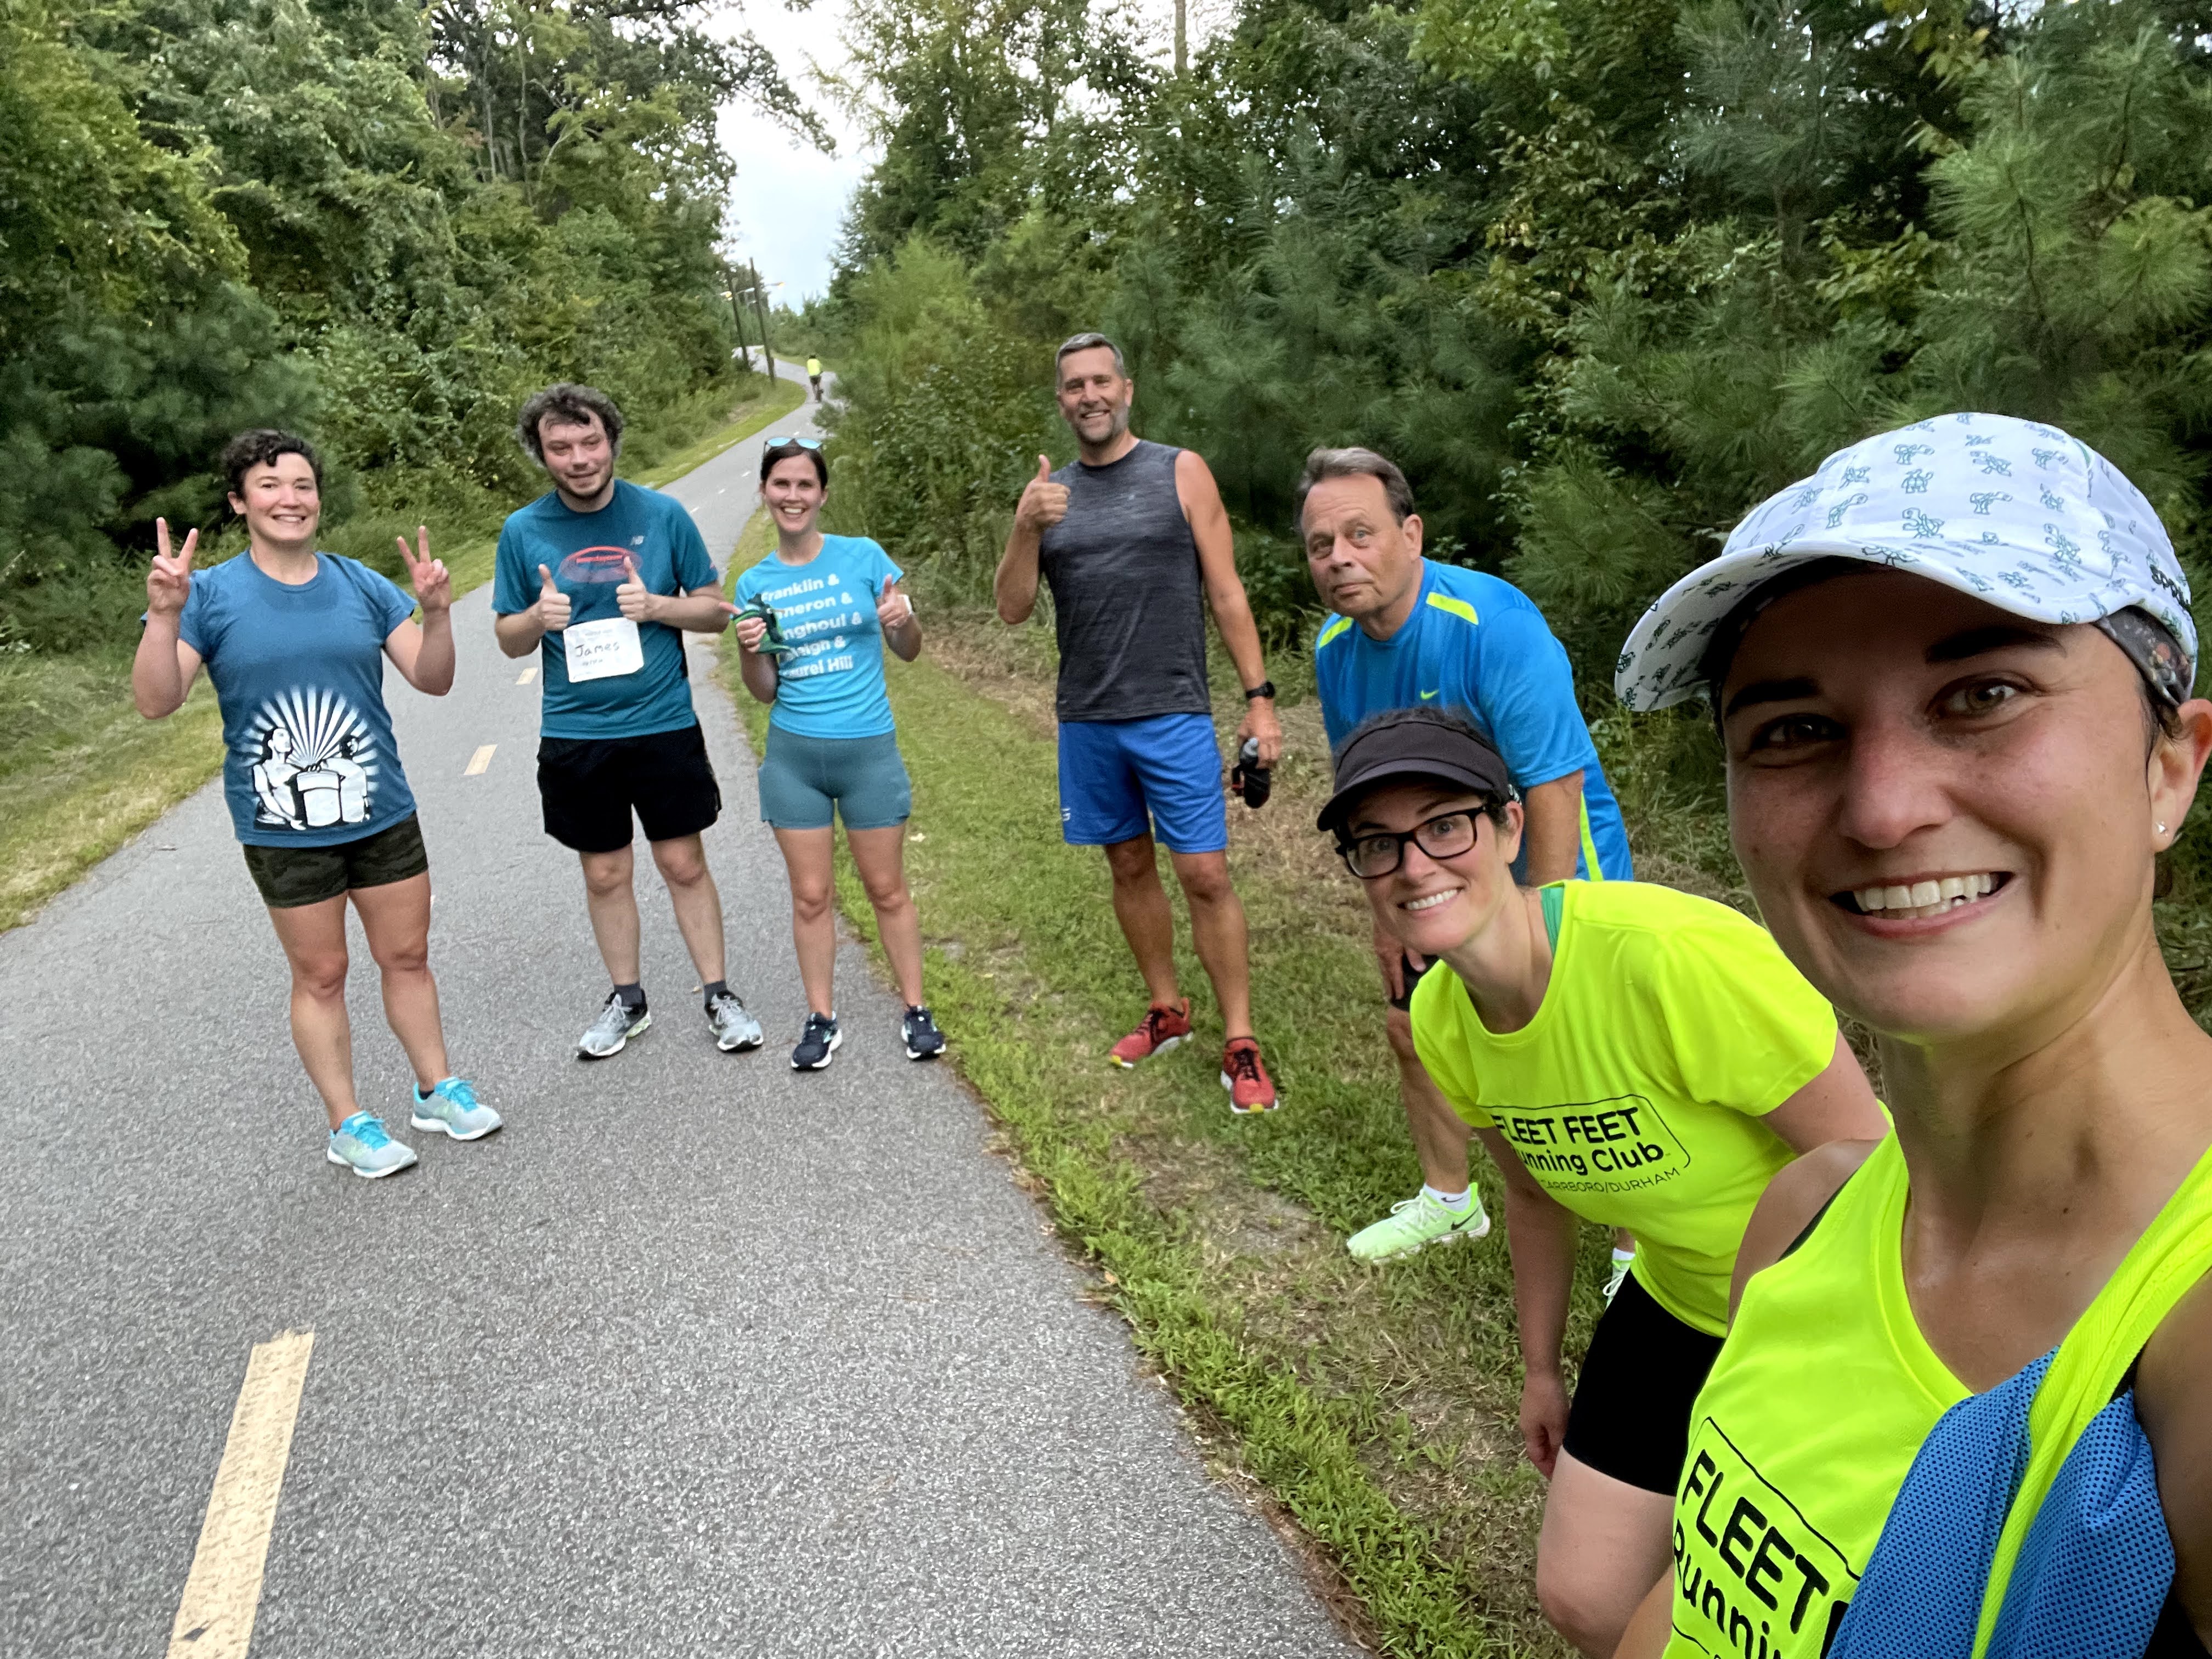 Group of smiling runners and walkers at the base of a hill